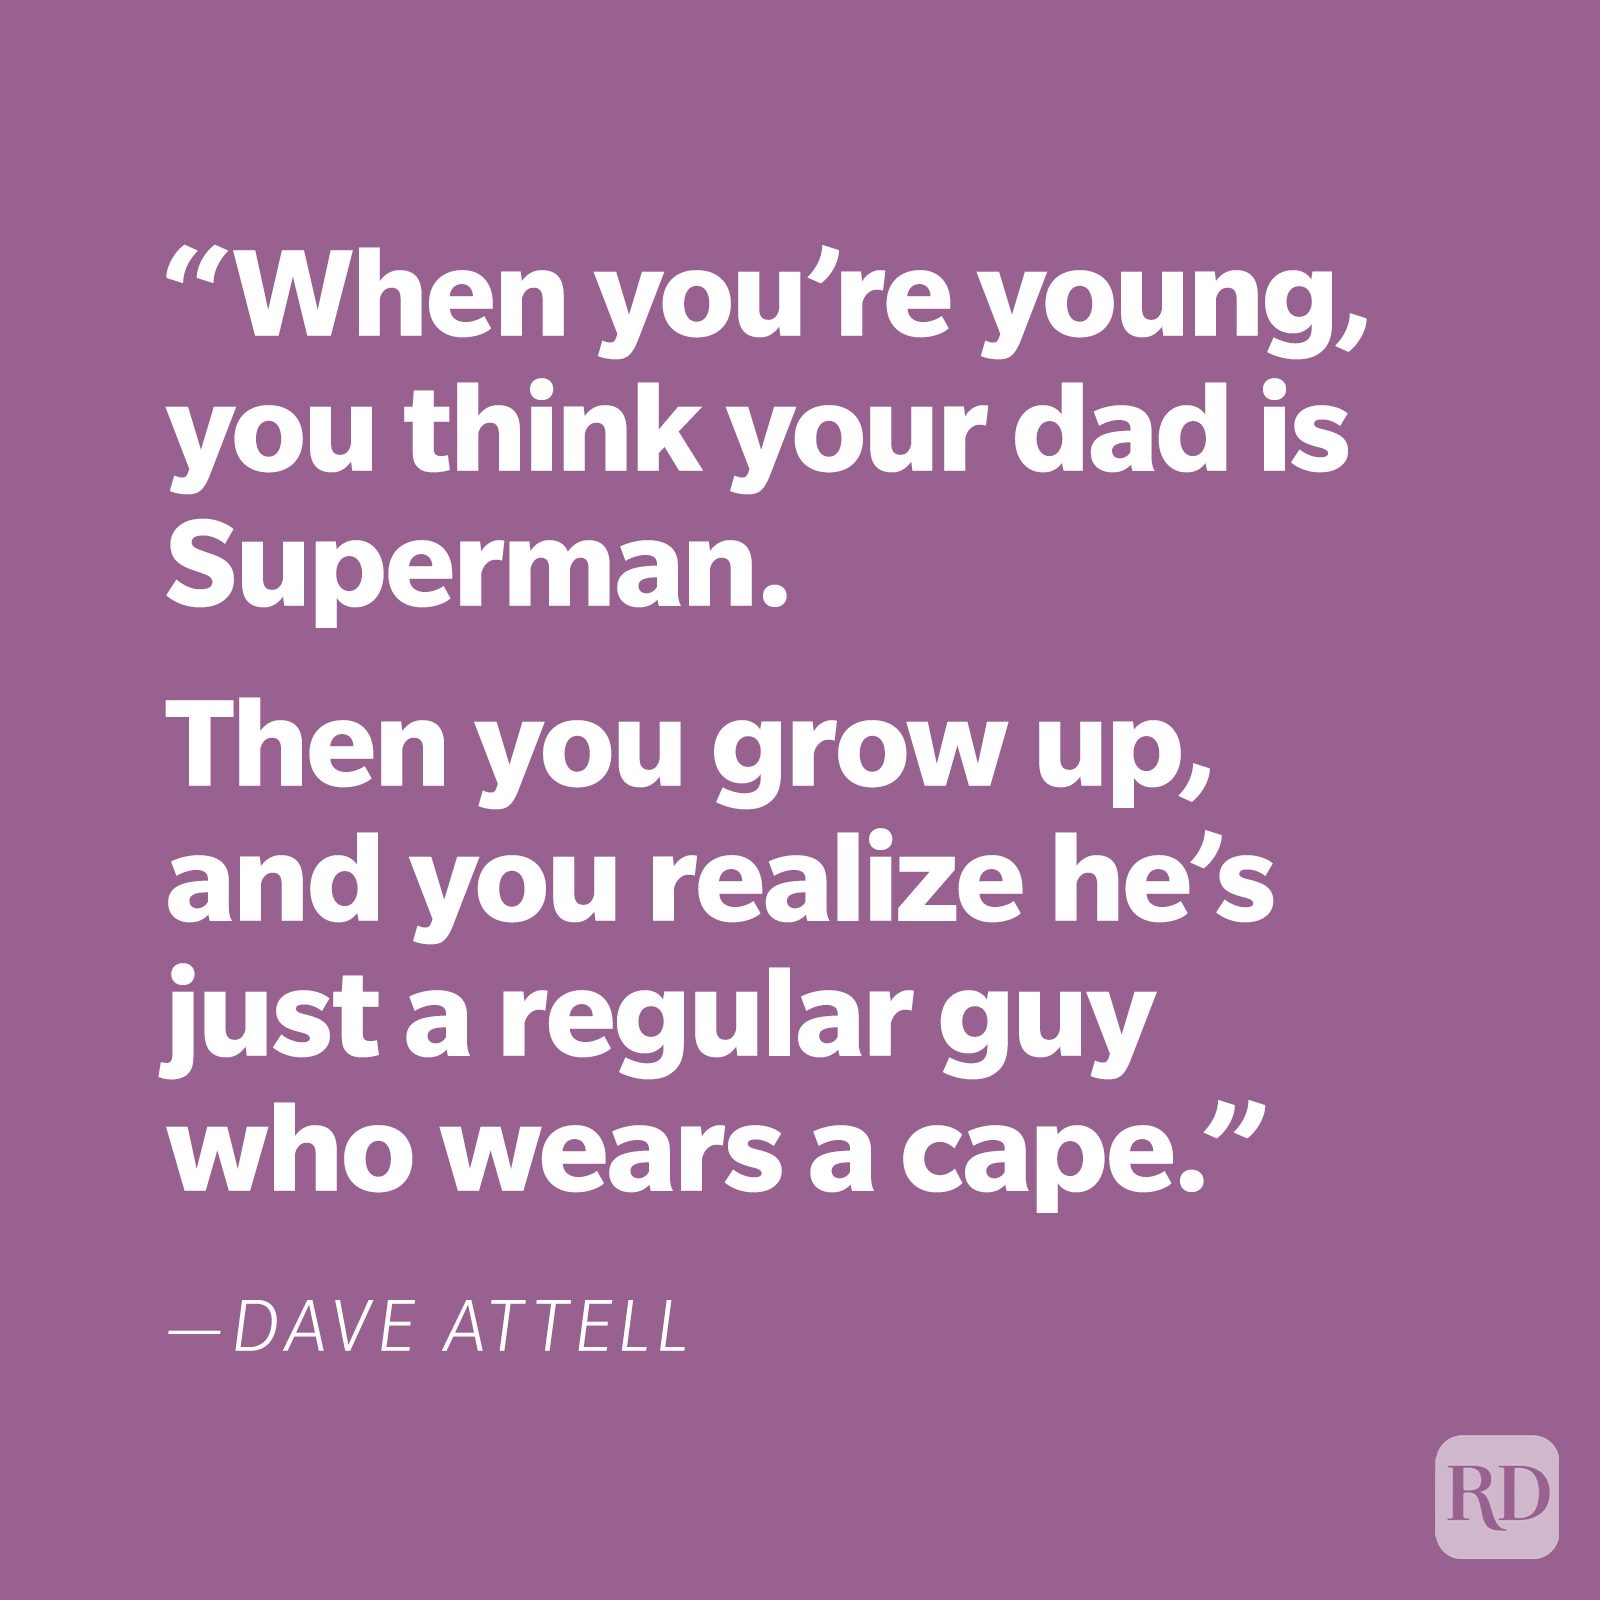 "When you're young, you think your dad is Superman. Then you grow up, and you realize he's just a regular guy who wears a cape." —Dave Attell